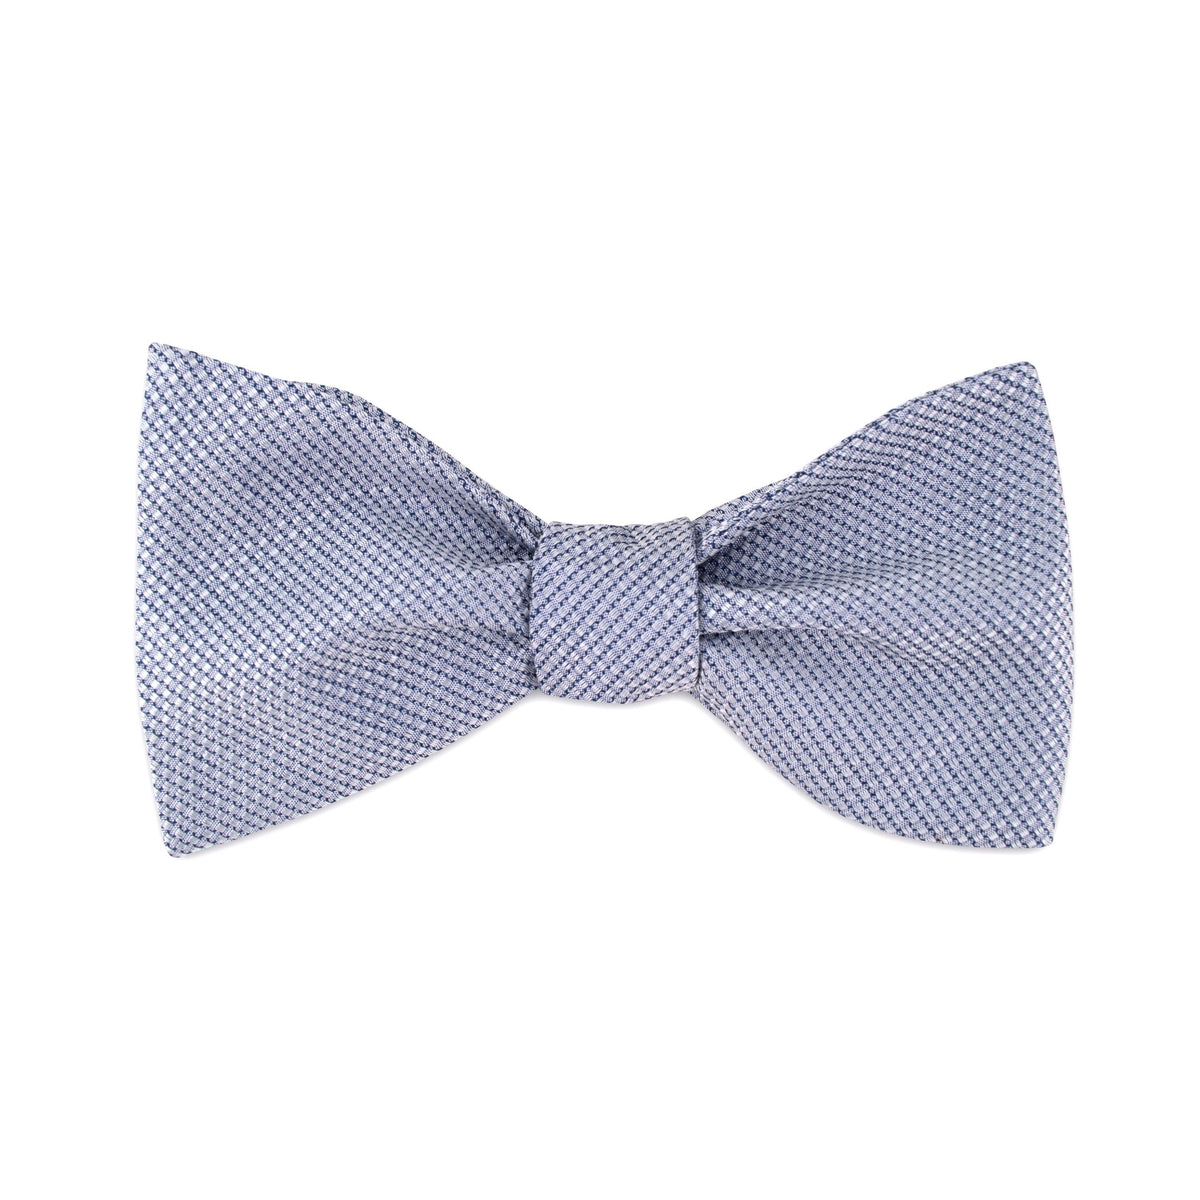 Silver Grey Textured Self Tie and Ready Made Bow Tie-Bow Ties-A.Azthom-Cufflinks.com.sg